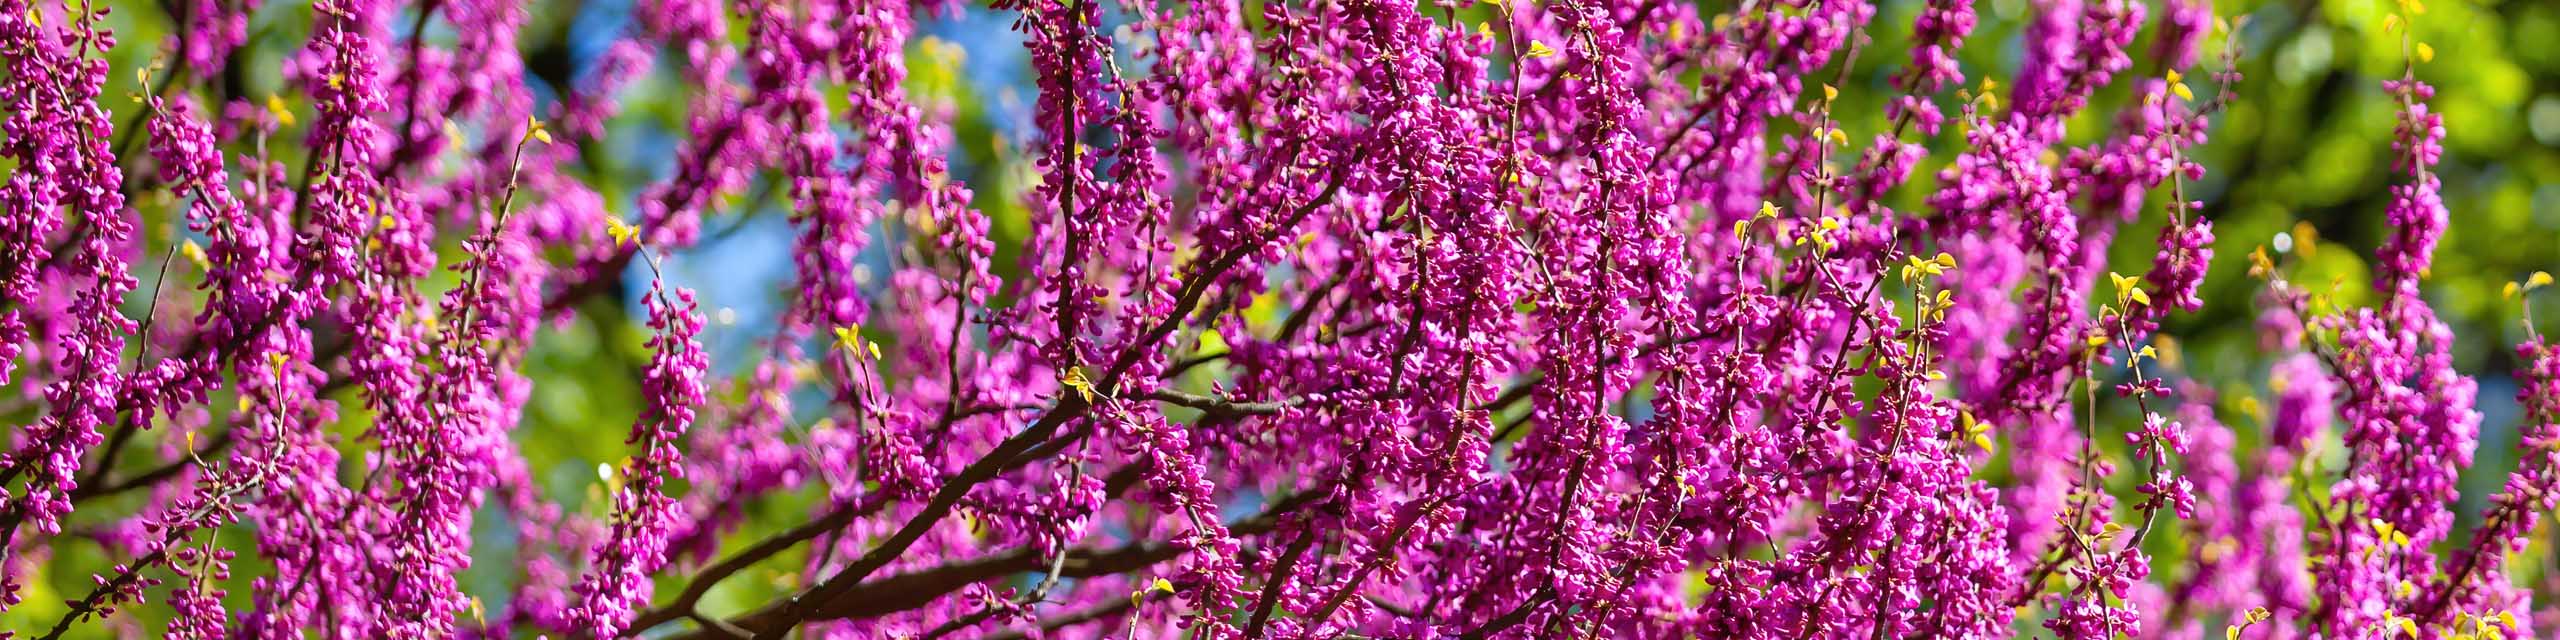 Redbud trees with pink blooms in the spring.